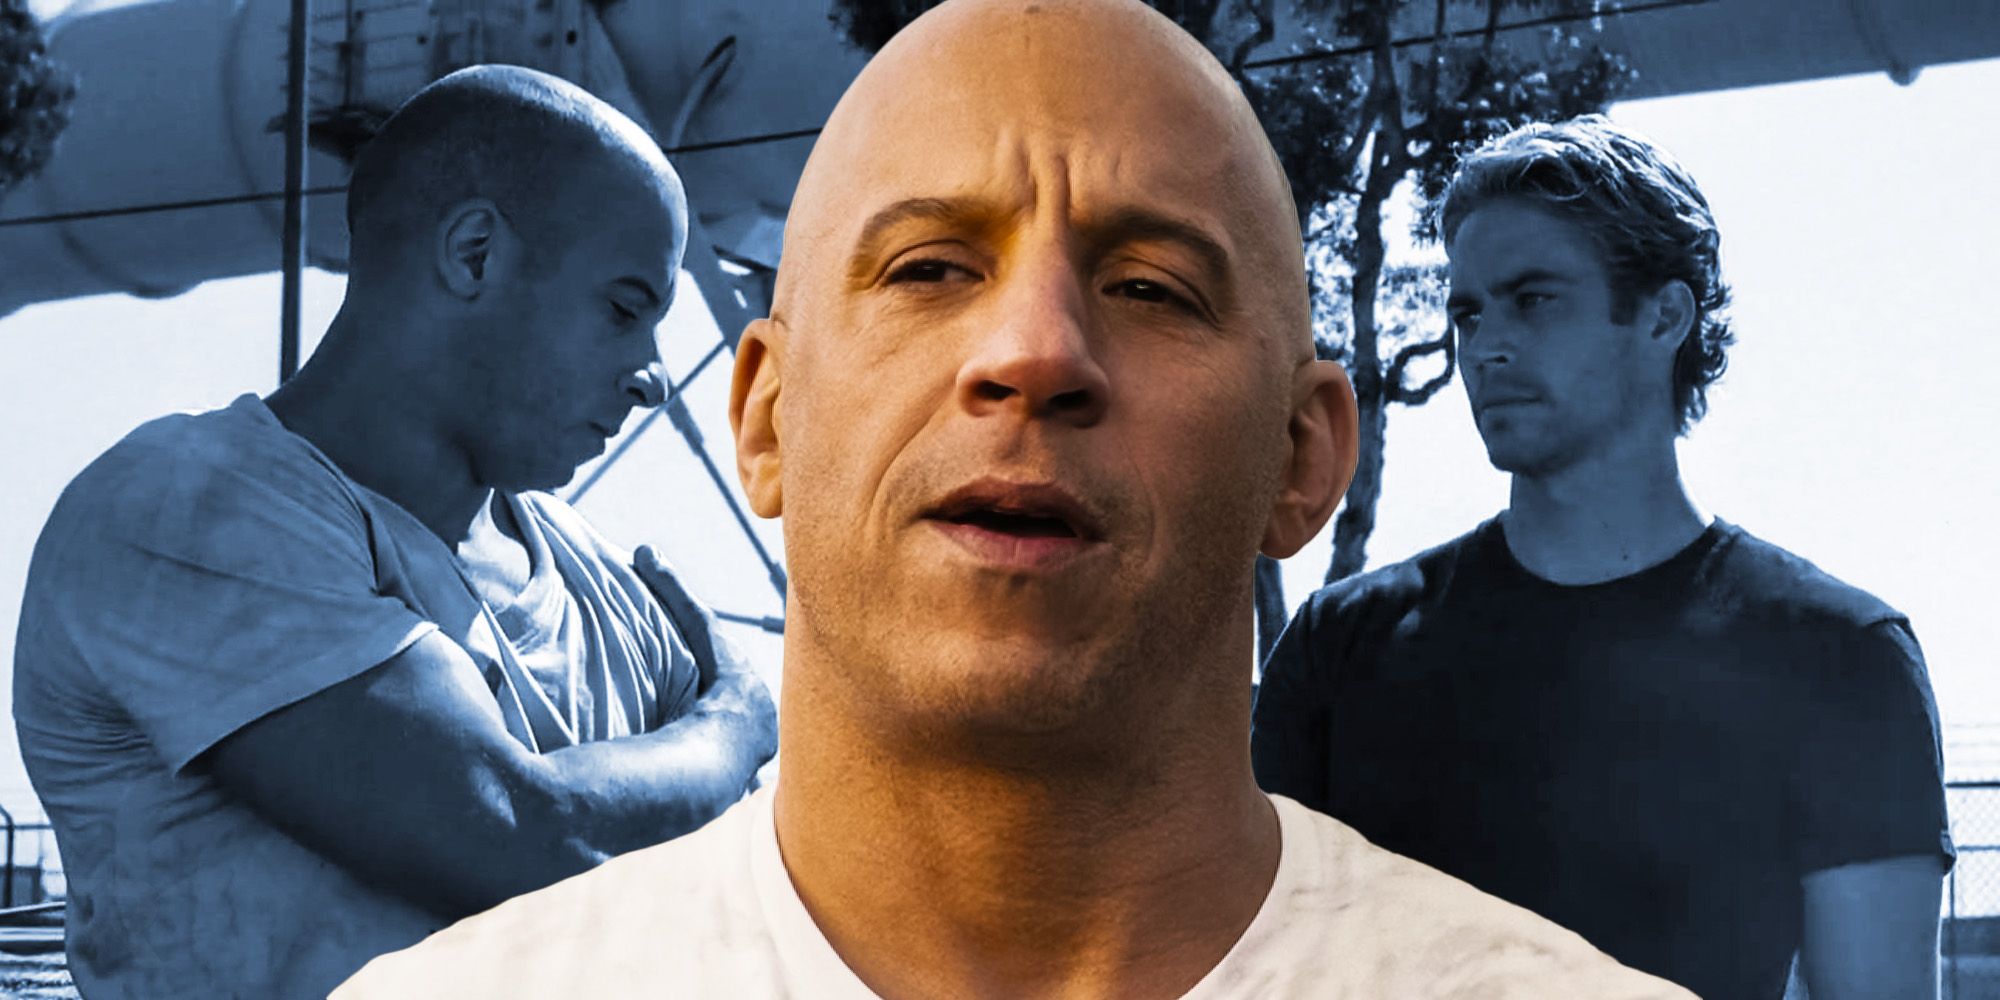 Fast and furious 9 set up fast 10 return to roots